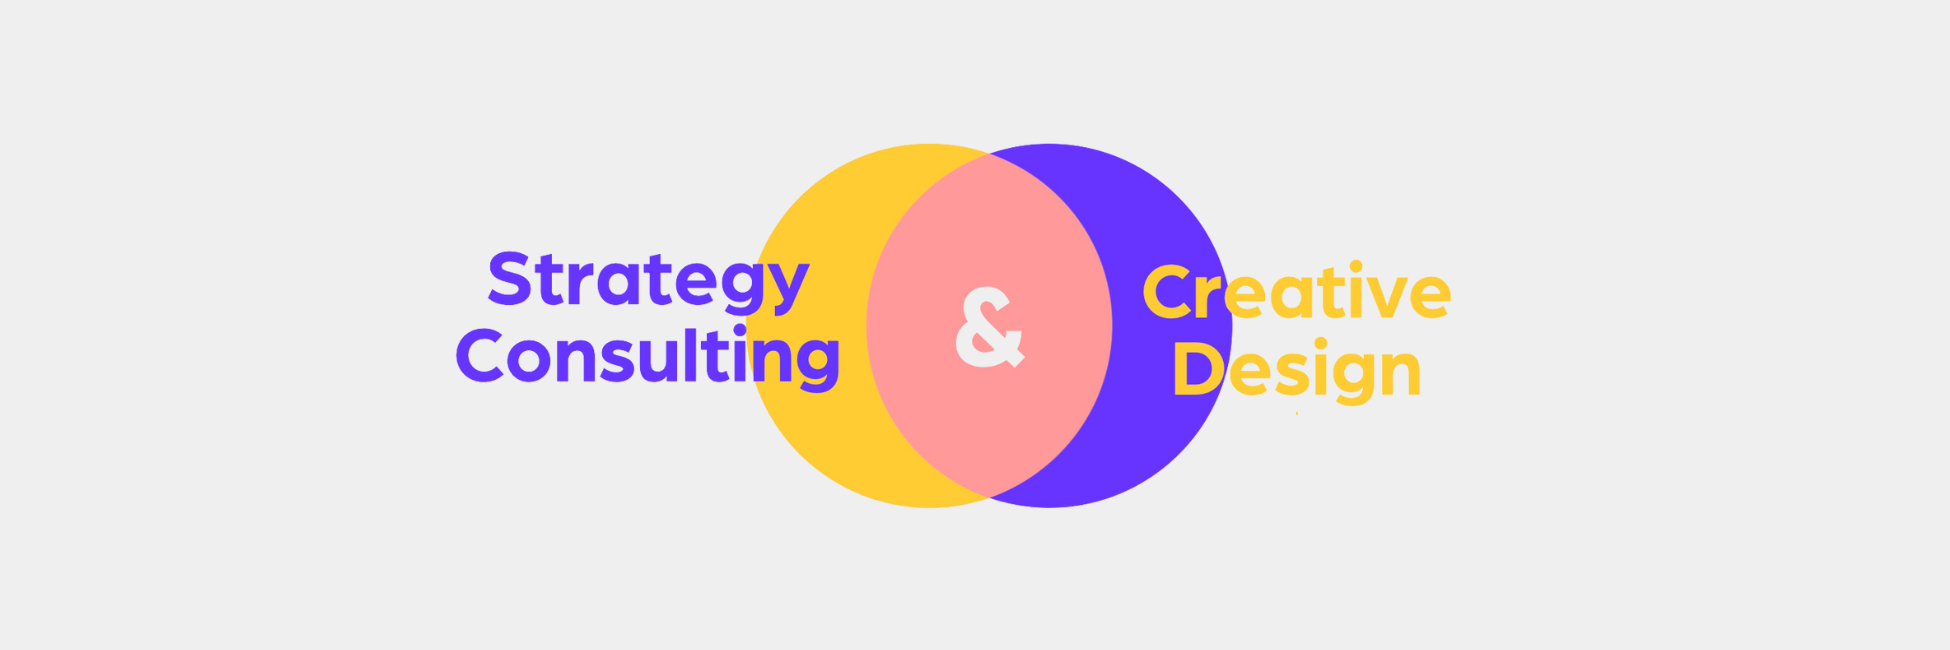 Sustainability Consulting Meets Creative Design Agency